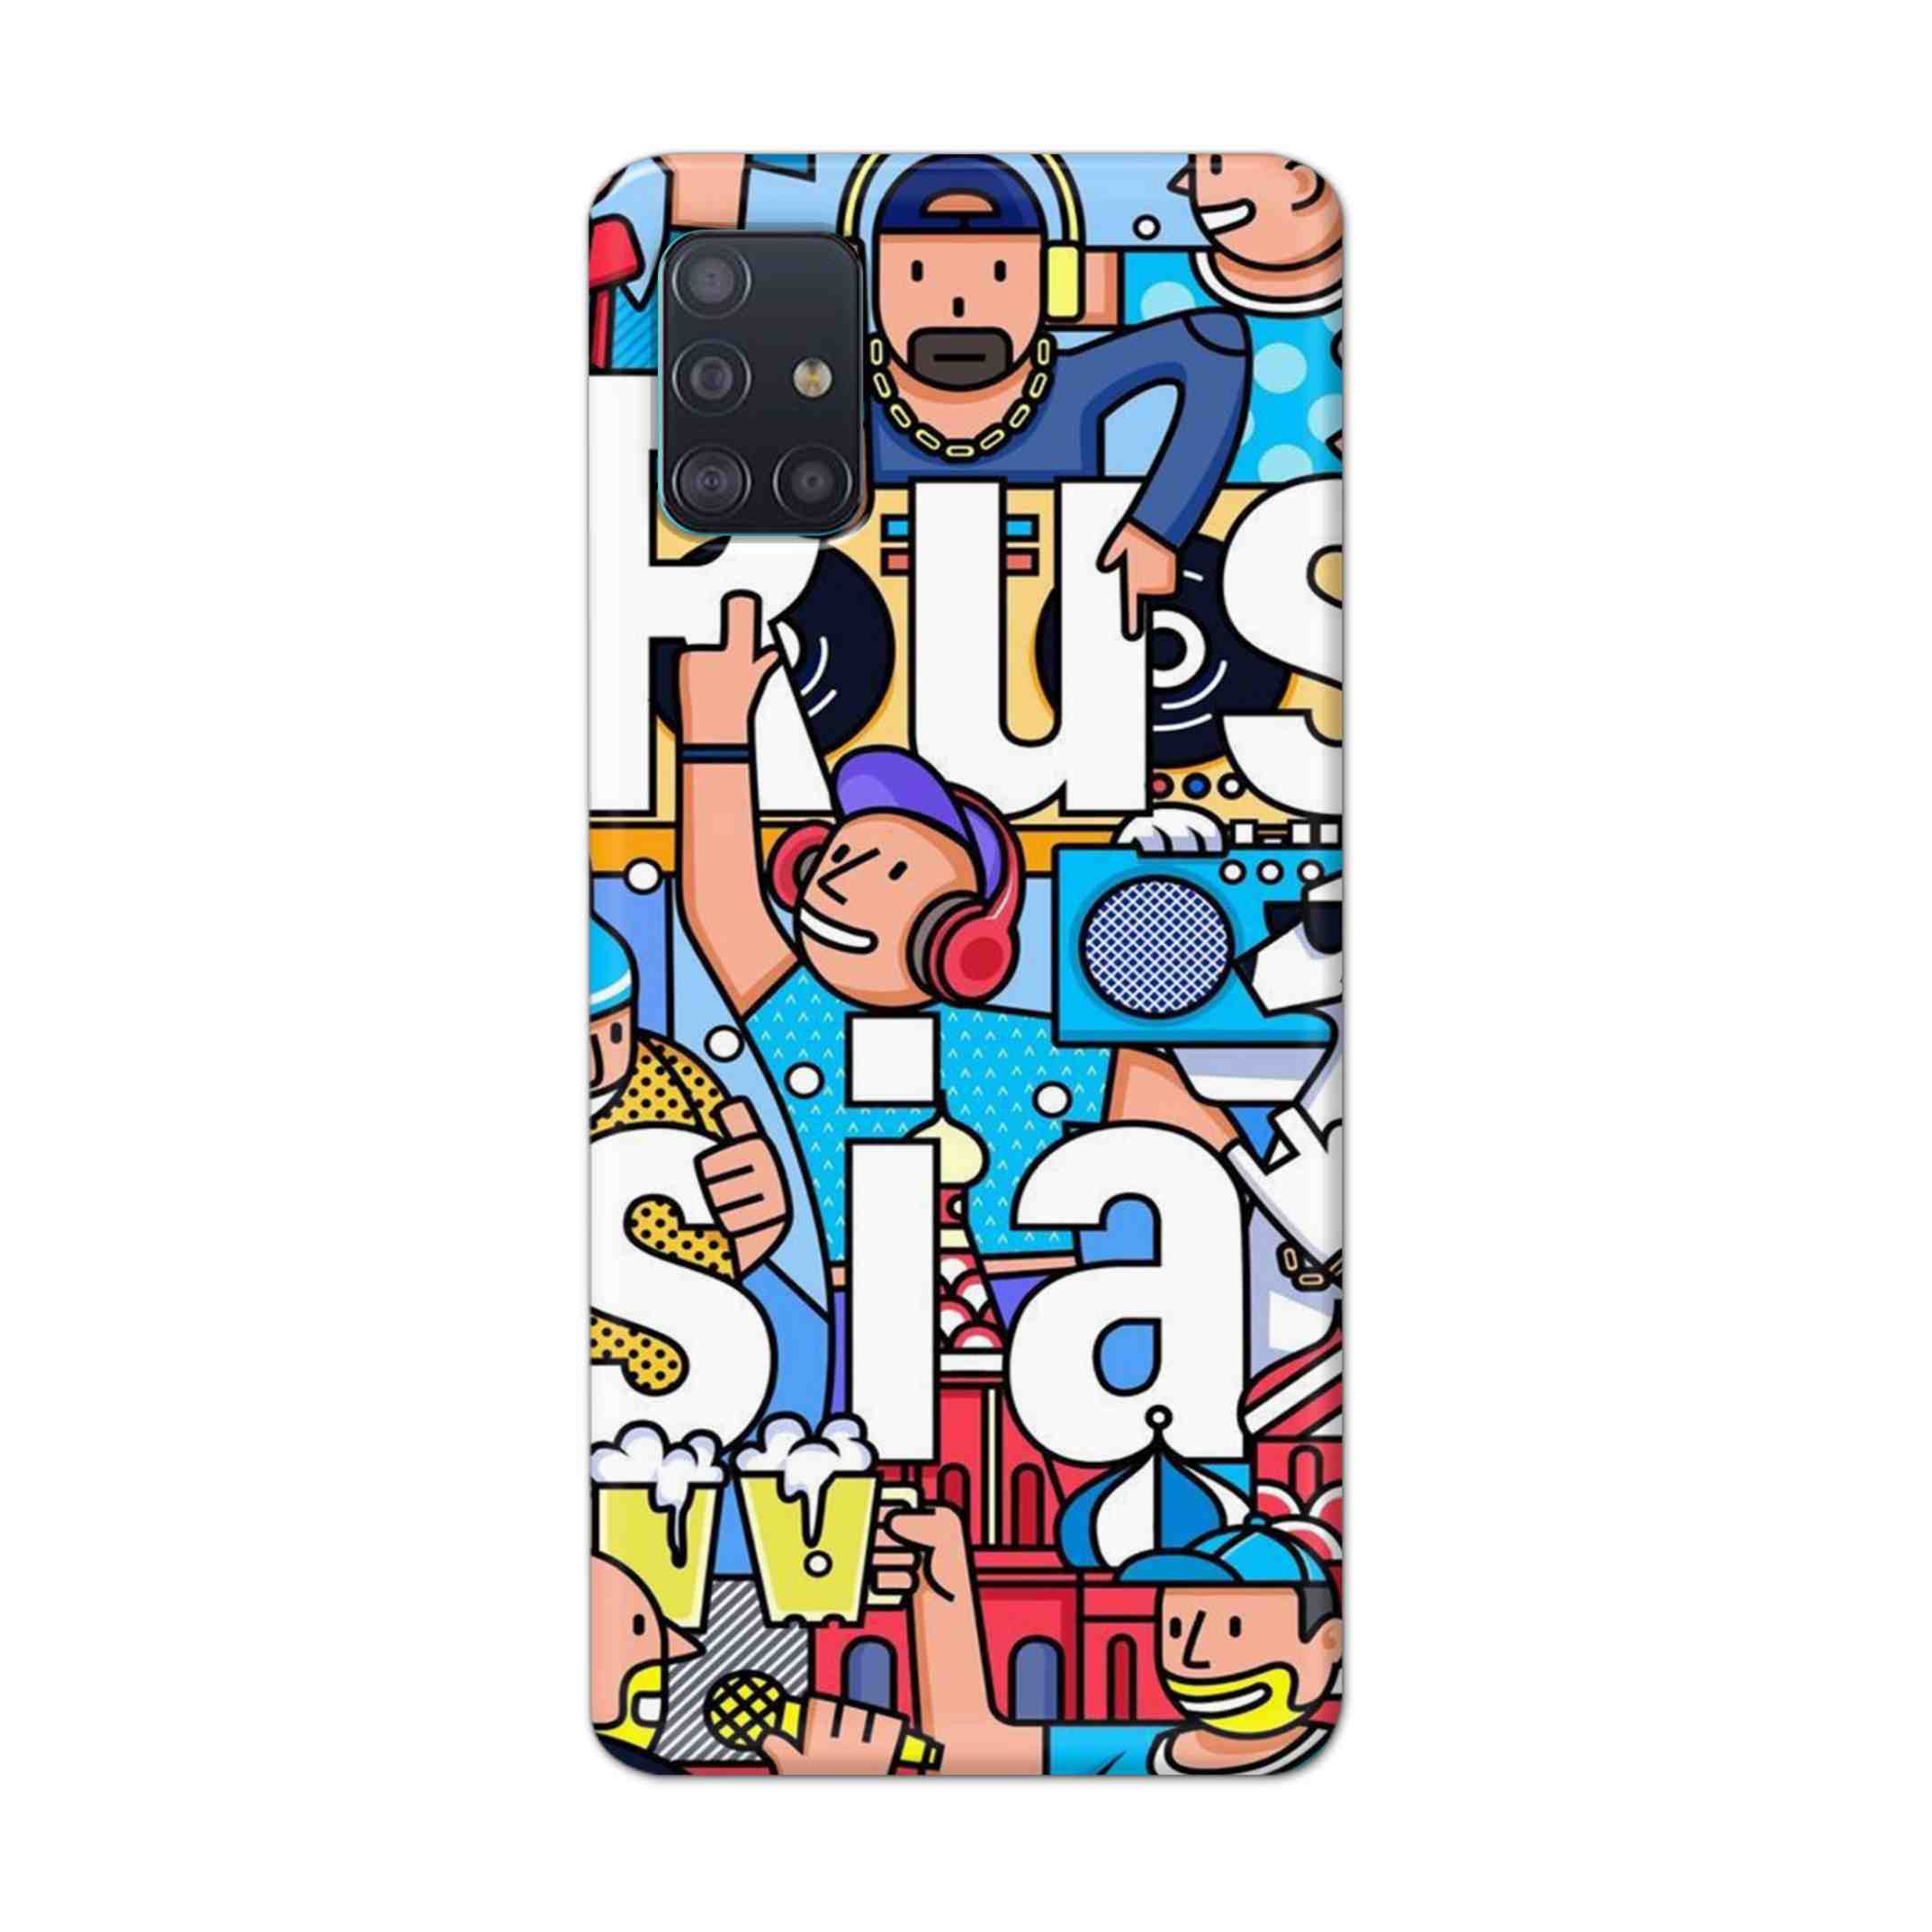 Buy Russia Hard Back Mobile Phone Case Cover For Samsung Galaxy A71 Online